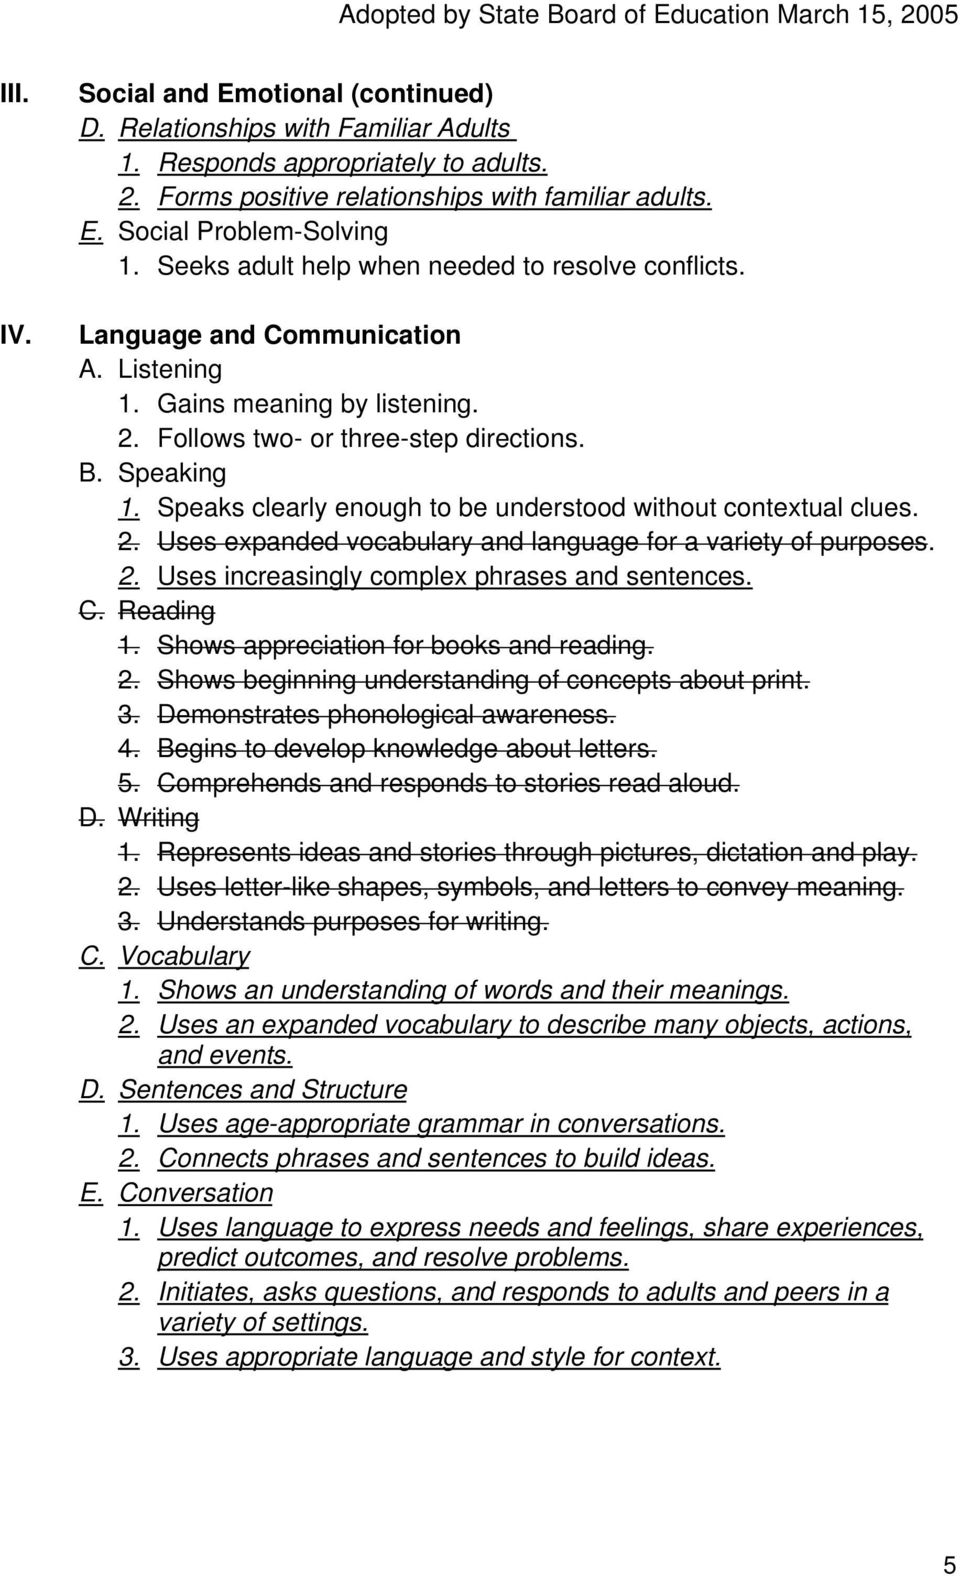 Speaks clearly enough to be understood without contextual clues. 2. Uses expanded vocabulary and language for a variety of purposes. 2. Uses increasingly complex phrases and sentences. C. Reading 1.